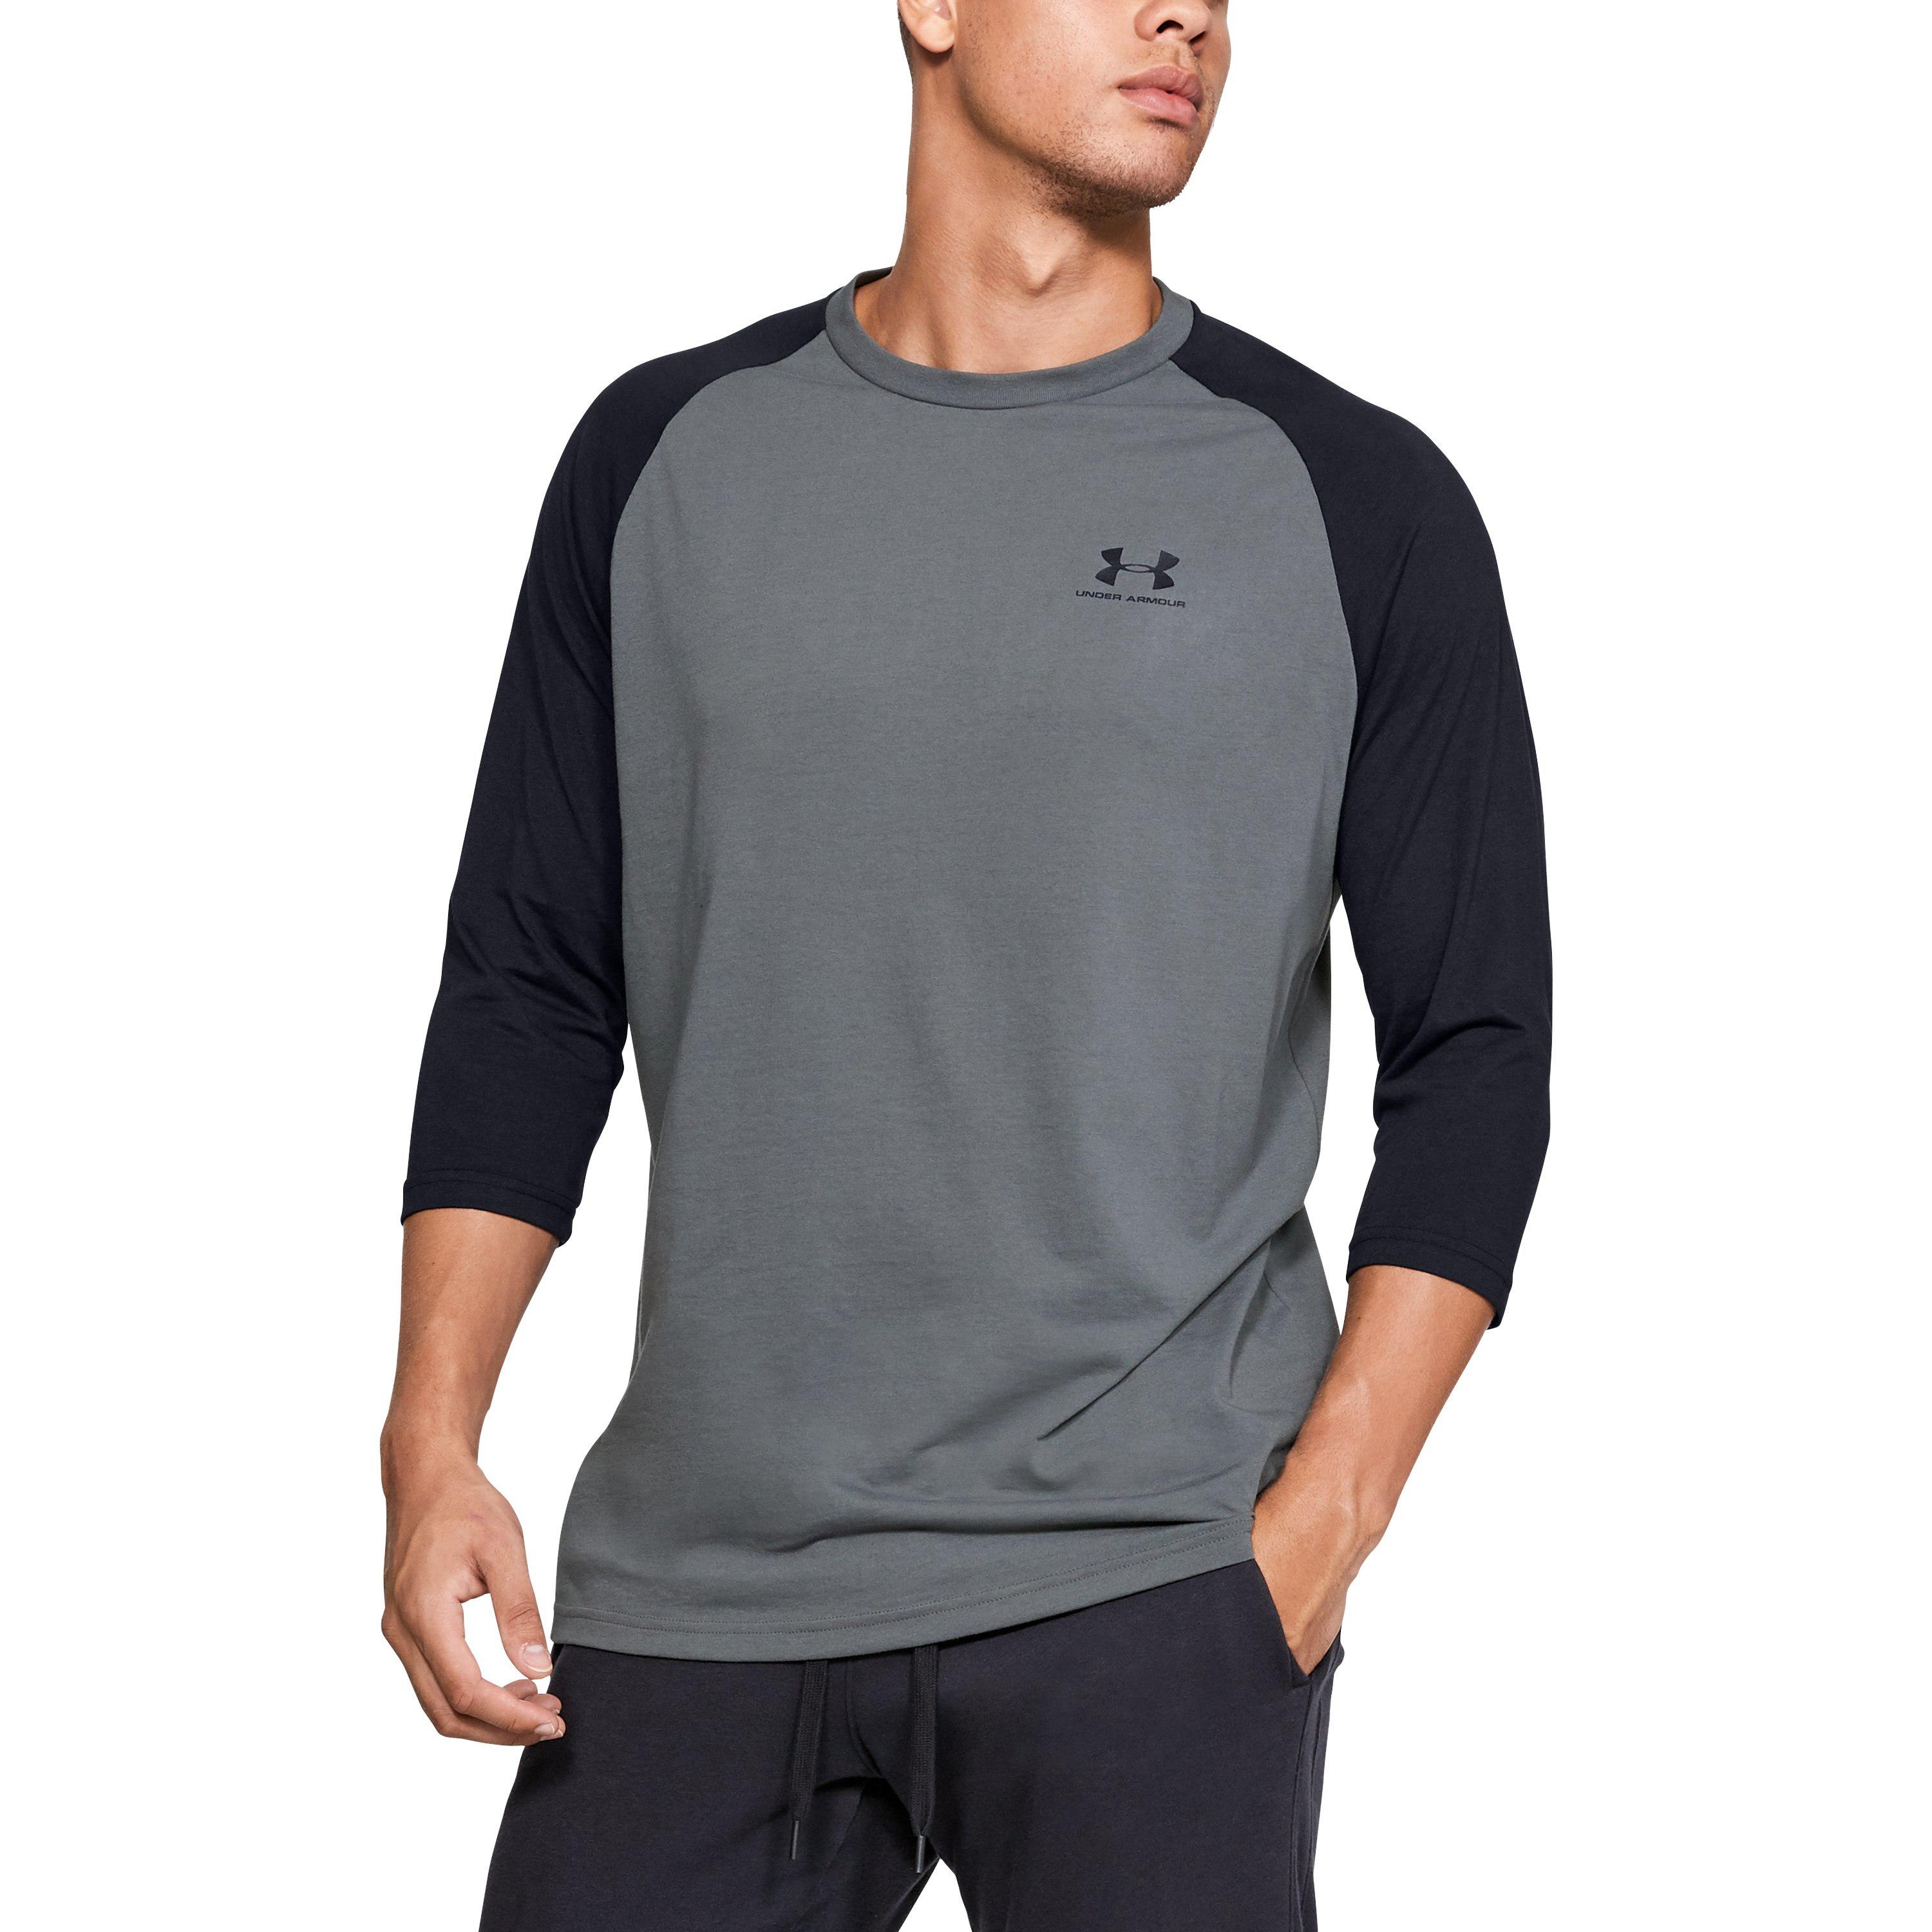 Under Armour Mens Sport style Long Sleeve T-Shirt 